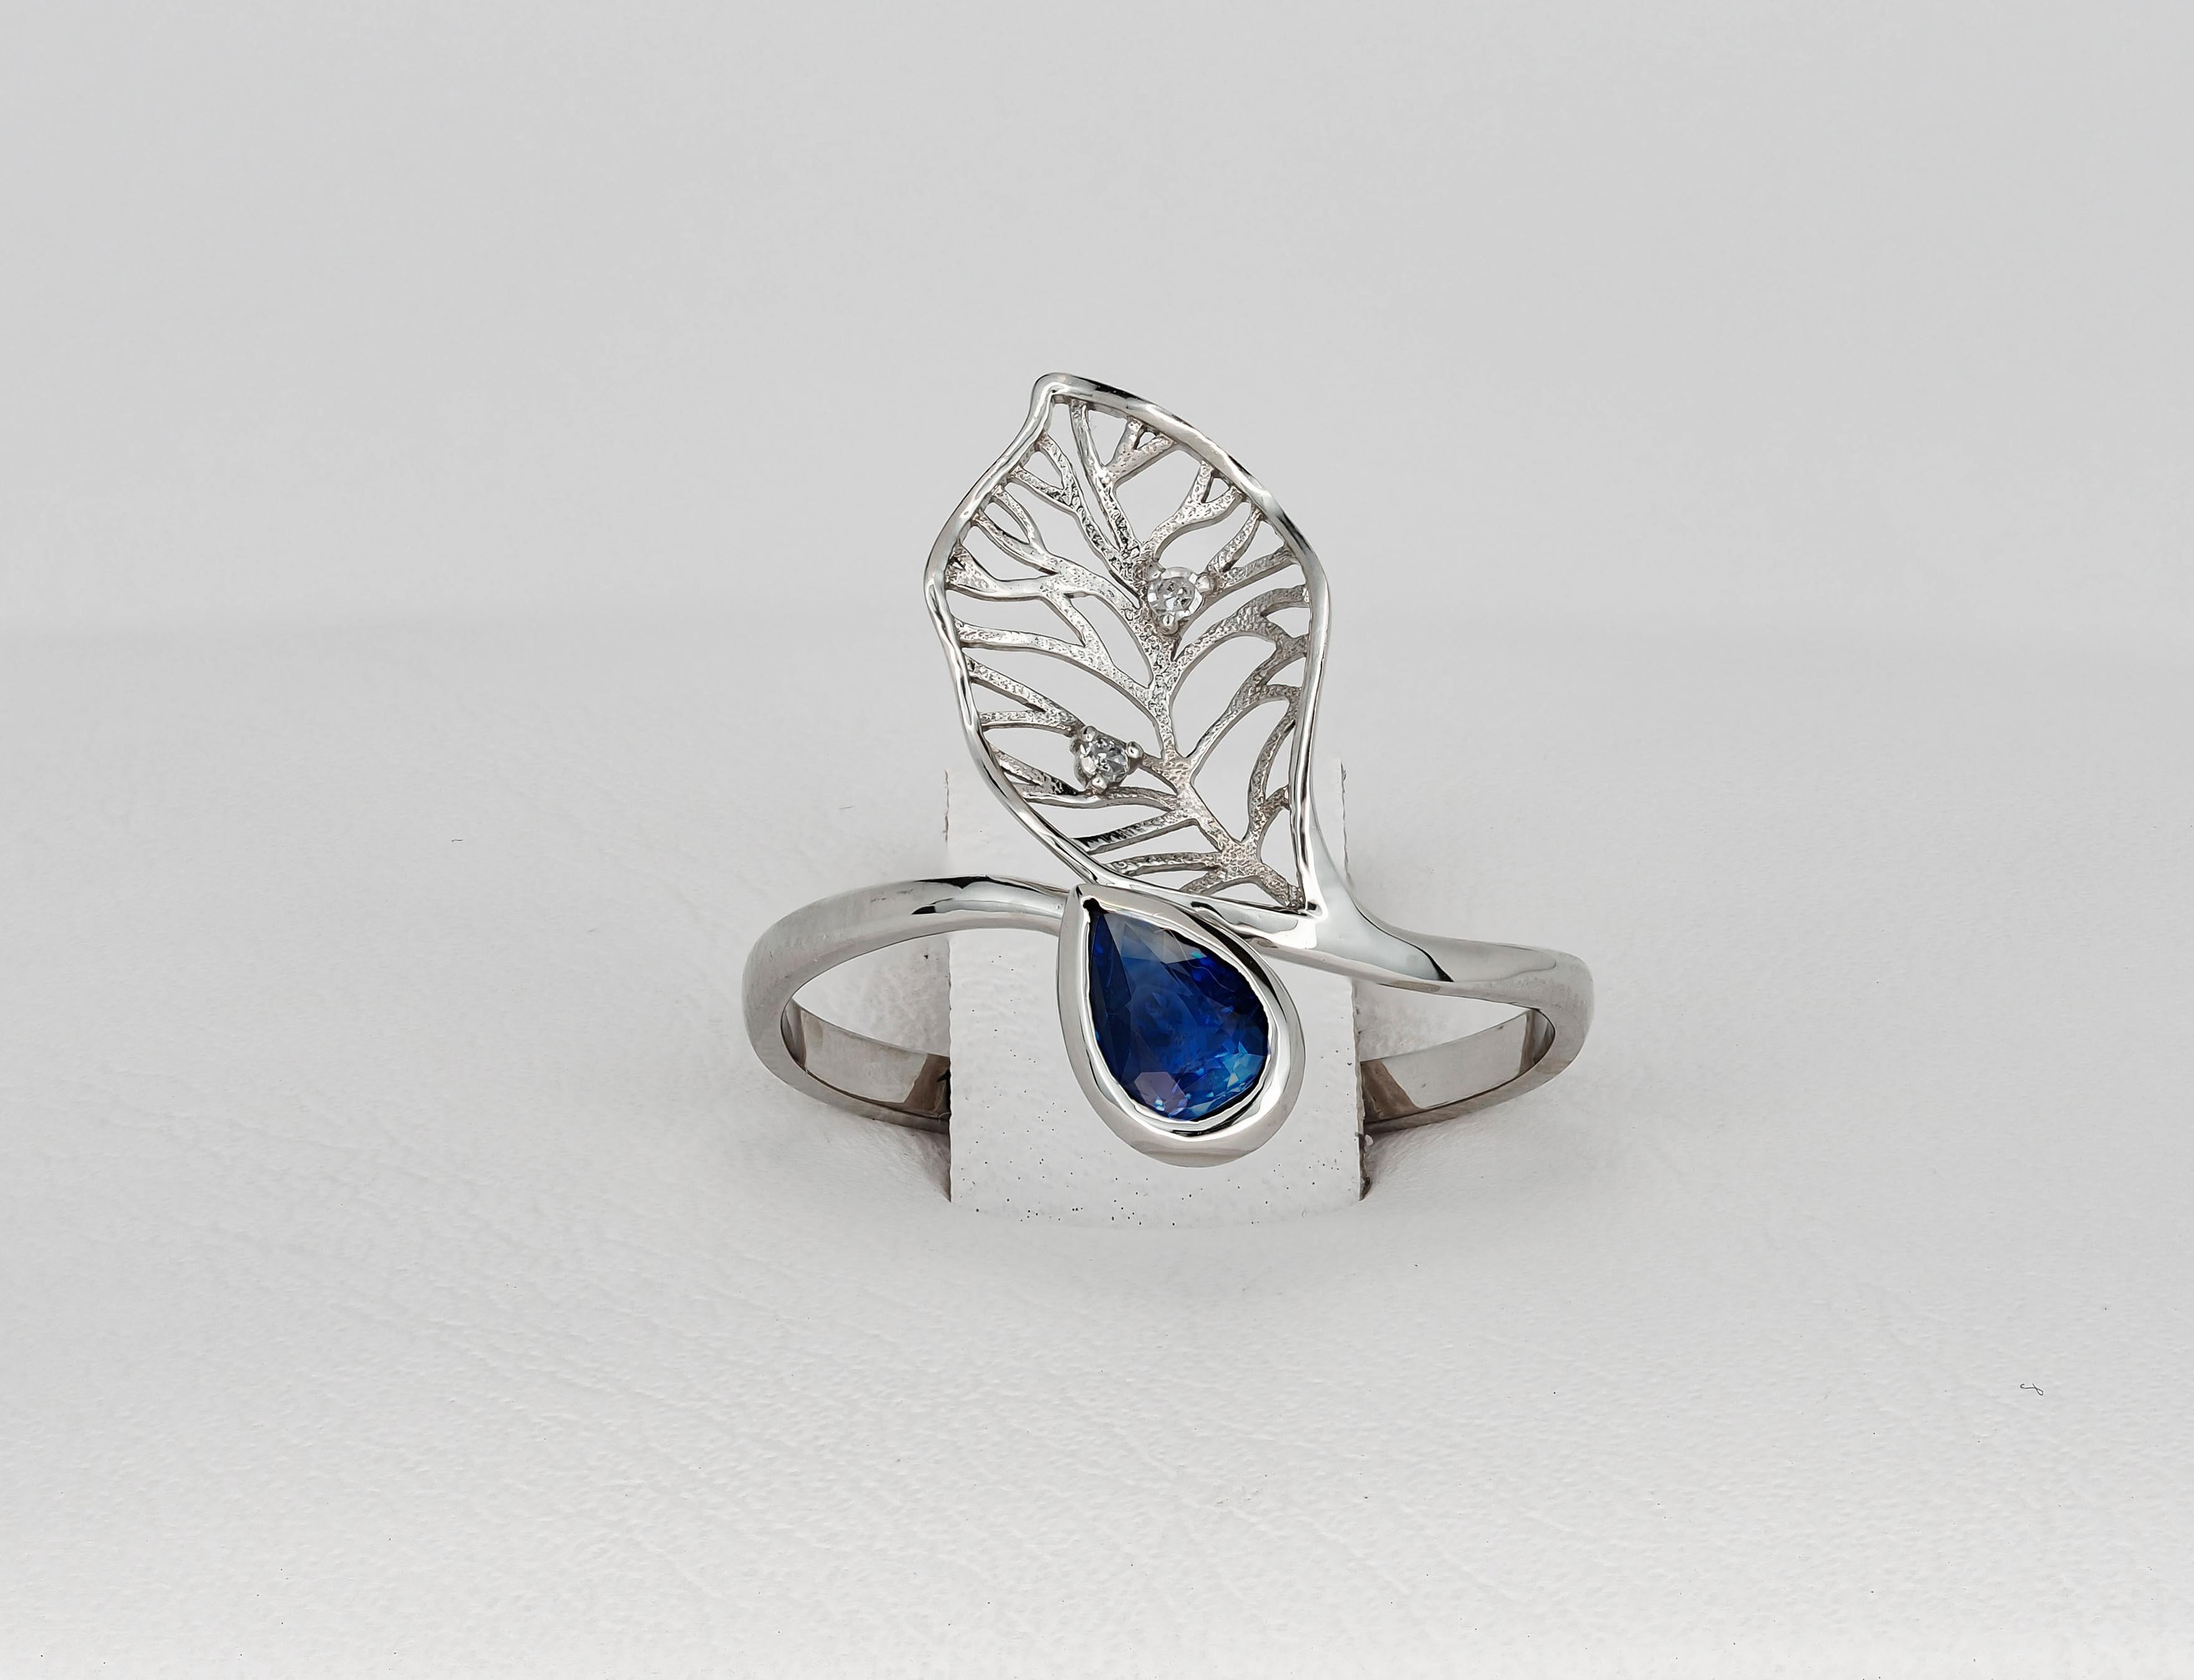 For Sale:  14 Karat Gold Ring with Sapphire and Diamonds. Floral Design Ring with Sapphire 7